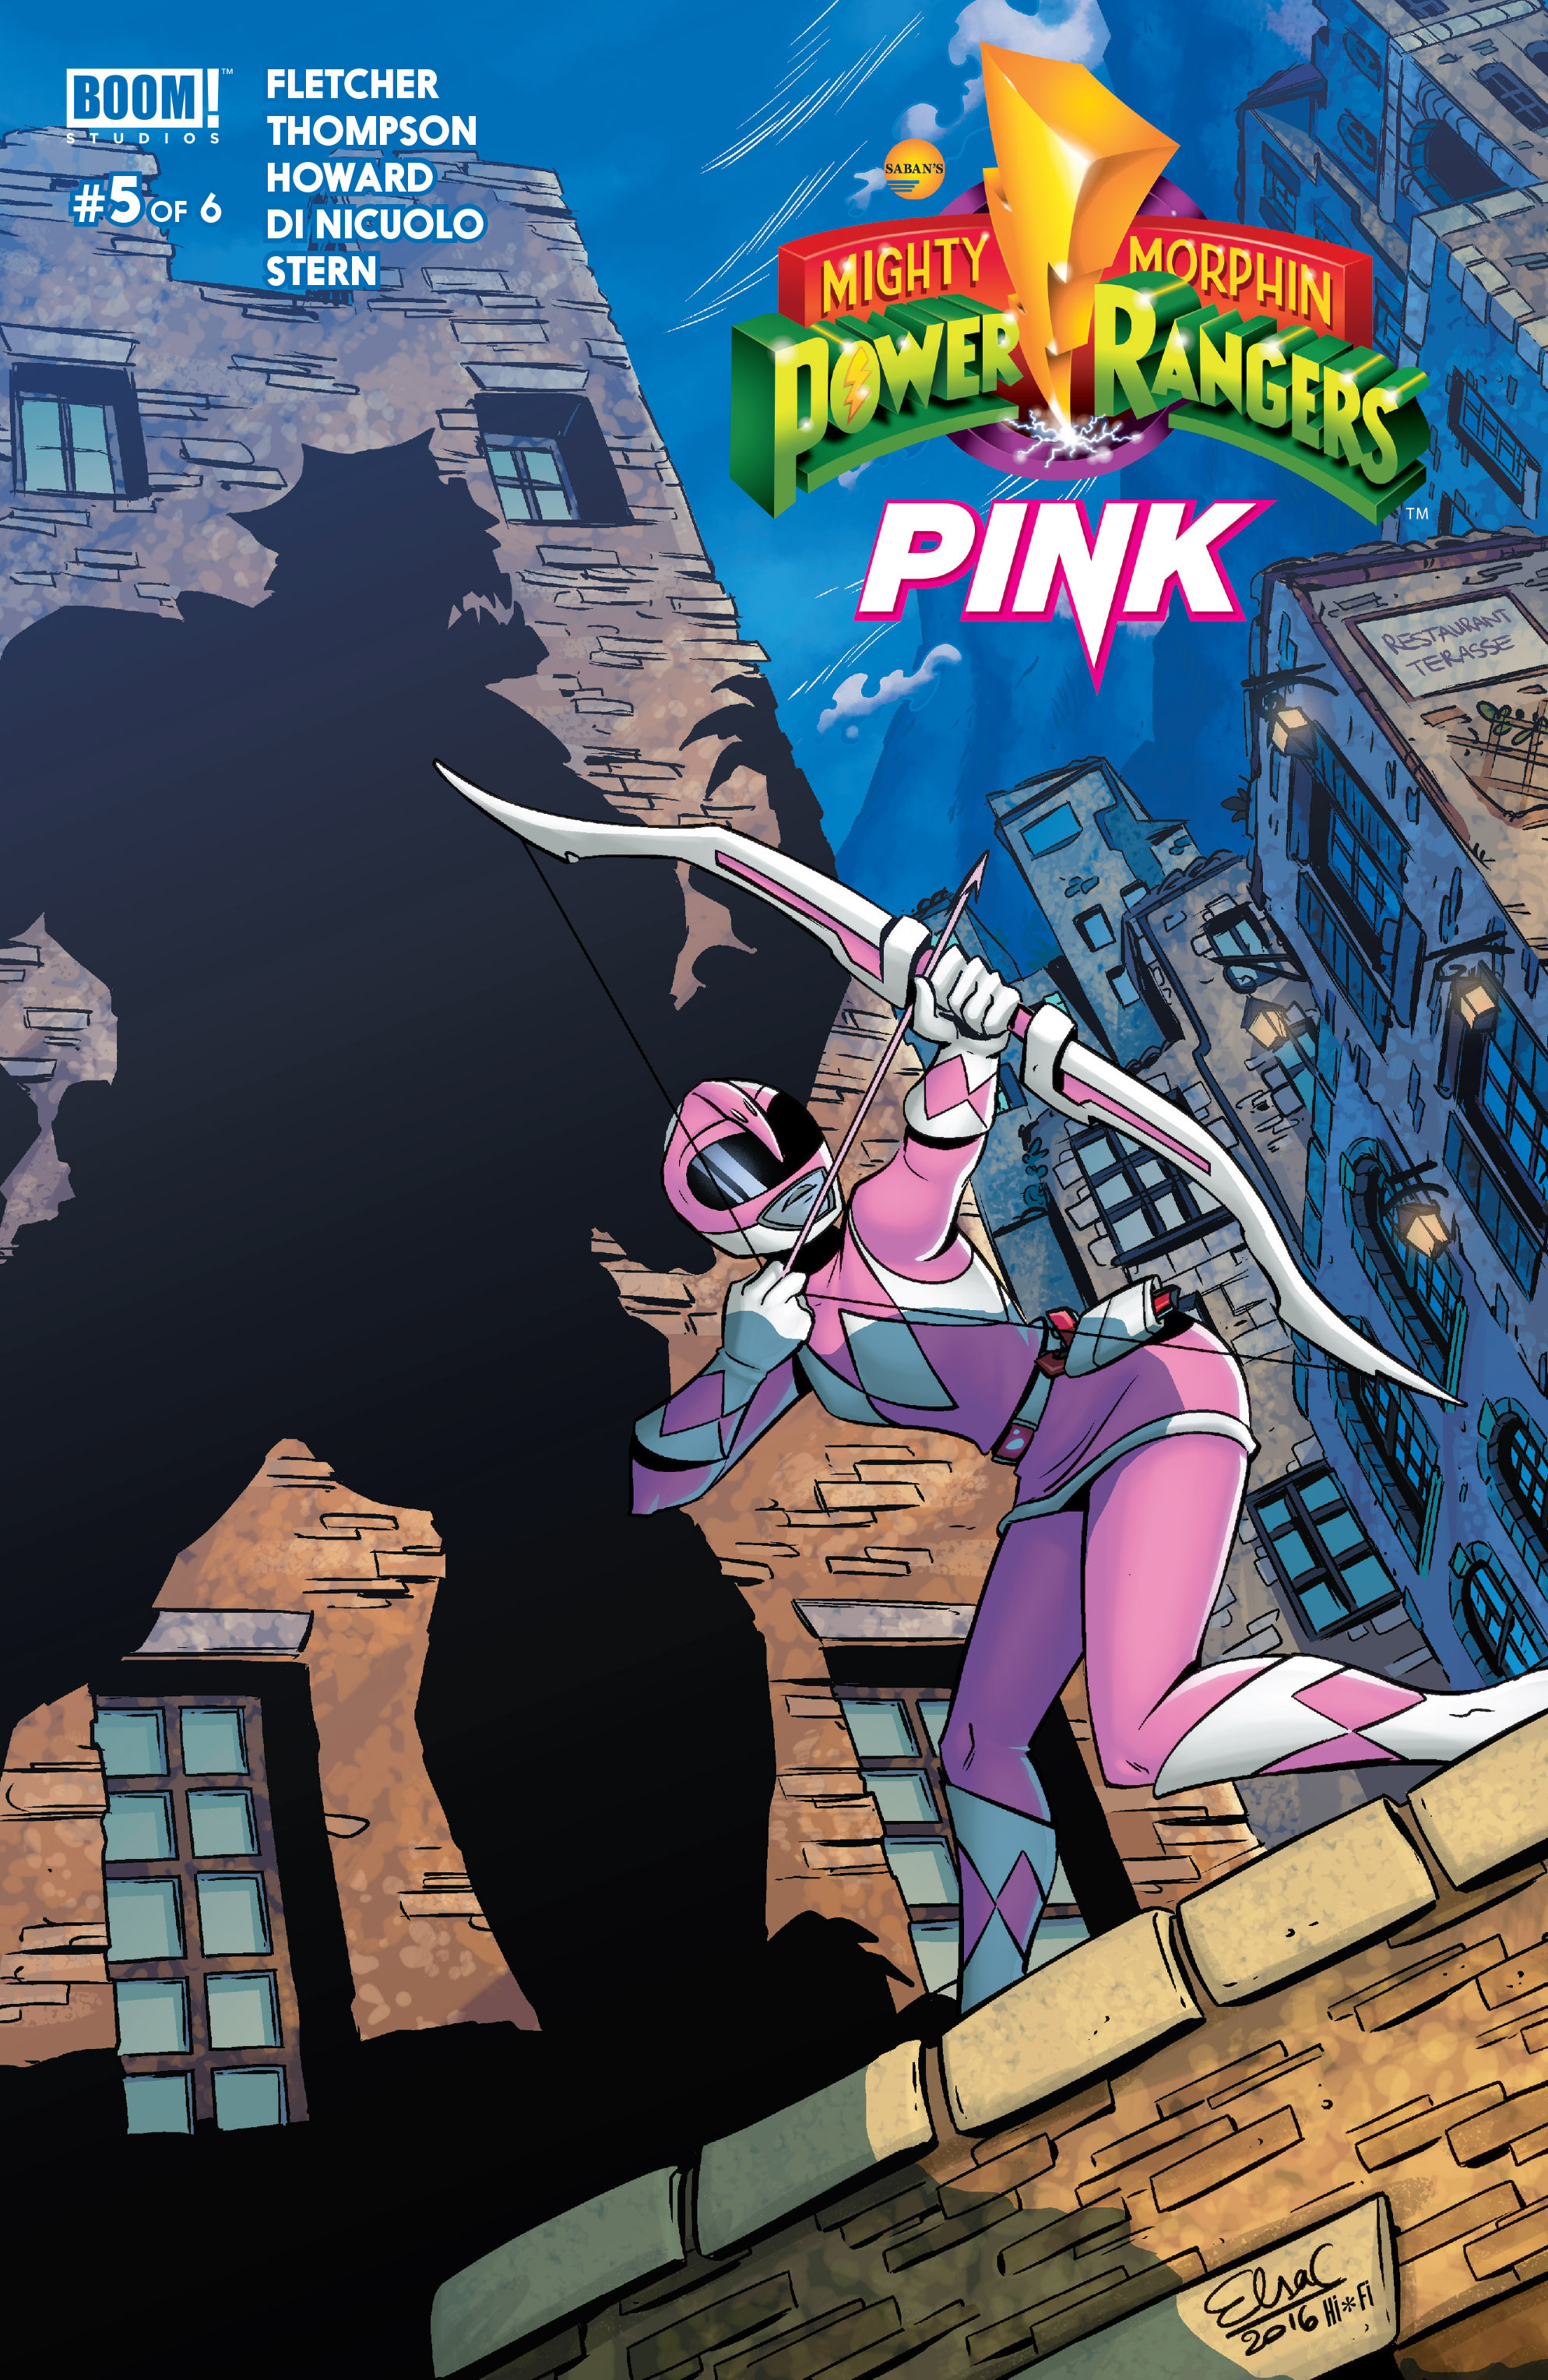 Mighty Morphin Power Rangers Pink Issue 5 | Read Mighty Morphin Power  Rangers Pink Issue 5 comic online in high quality. Website to search,  classify, summarize, and evaluate comics.